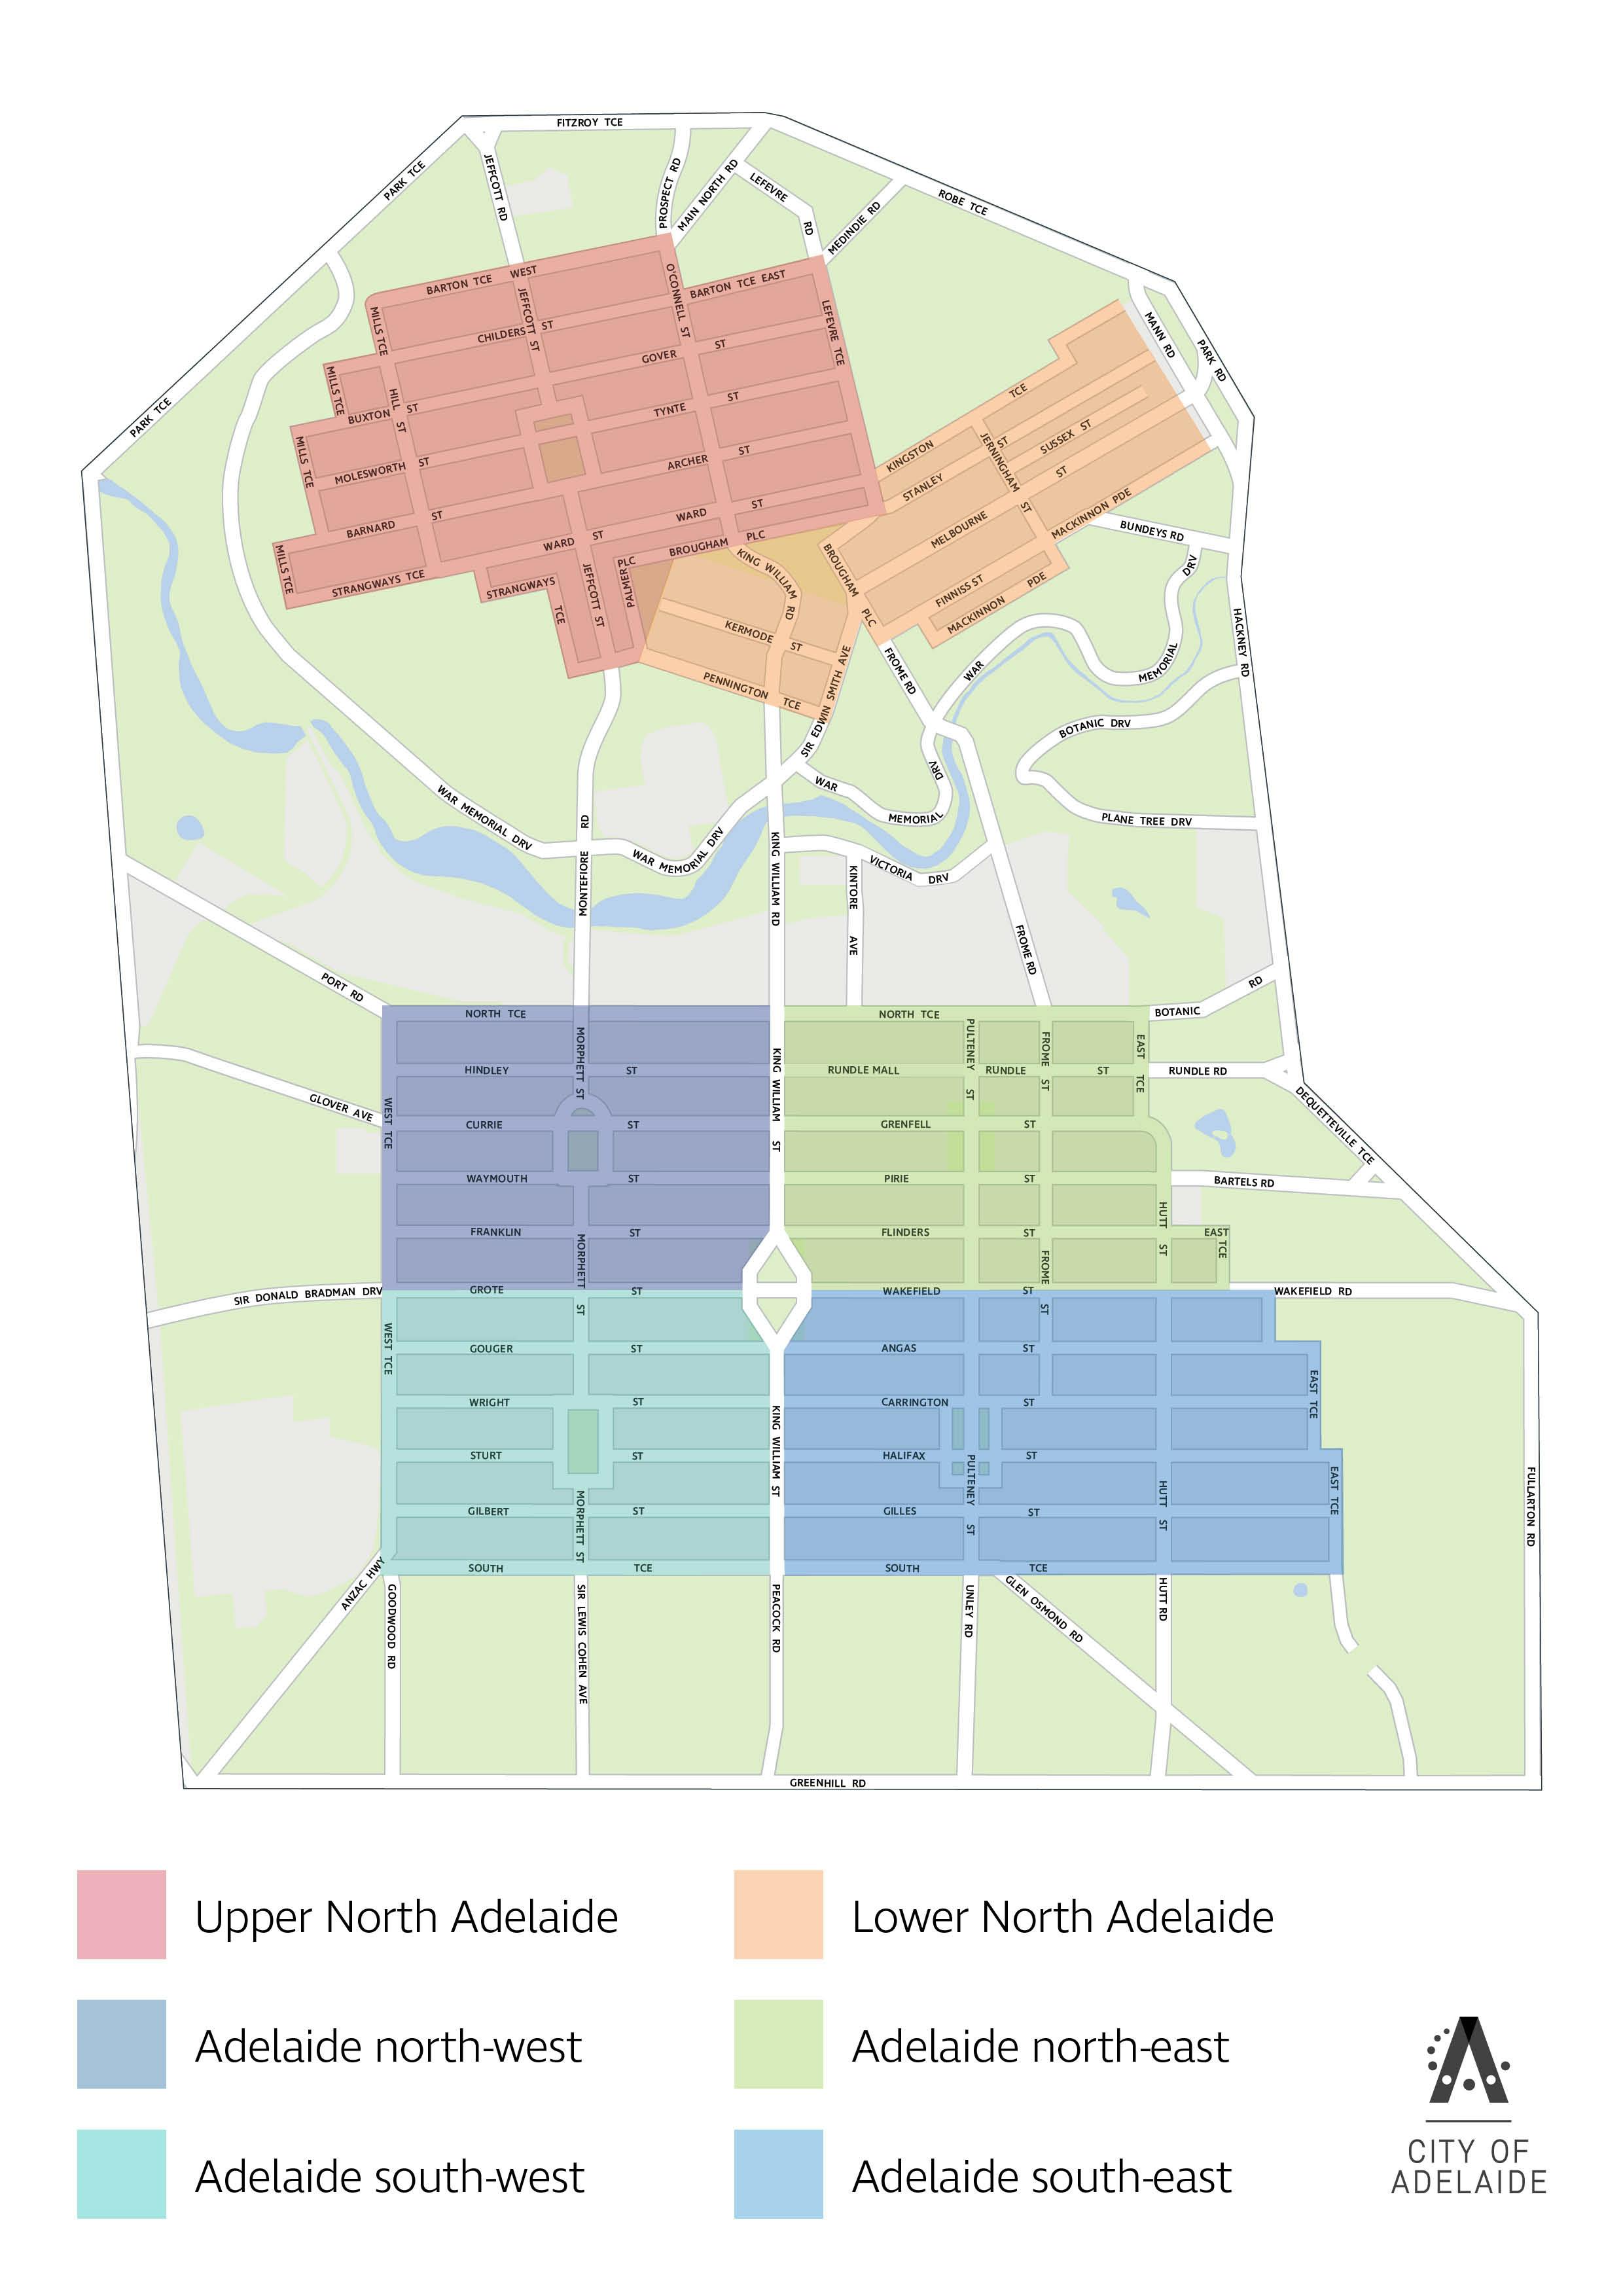 PAG19-005 Resident Survey_A4 Map.jpg